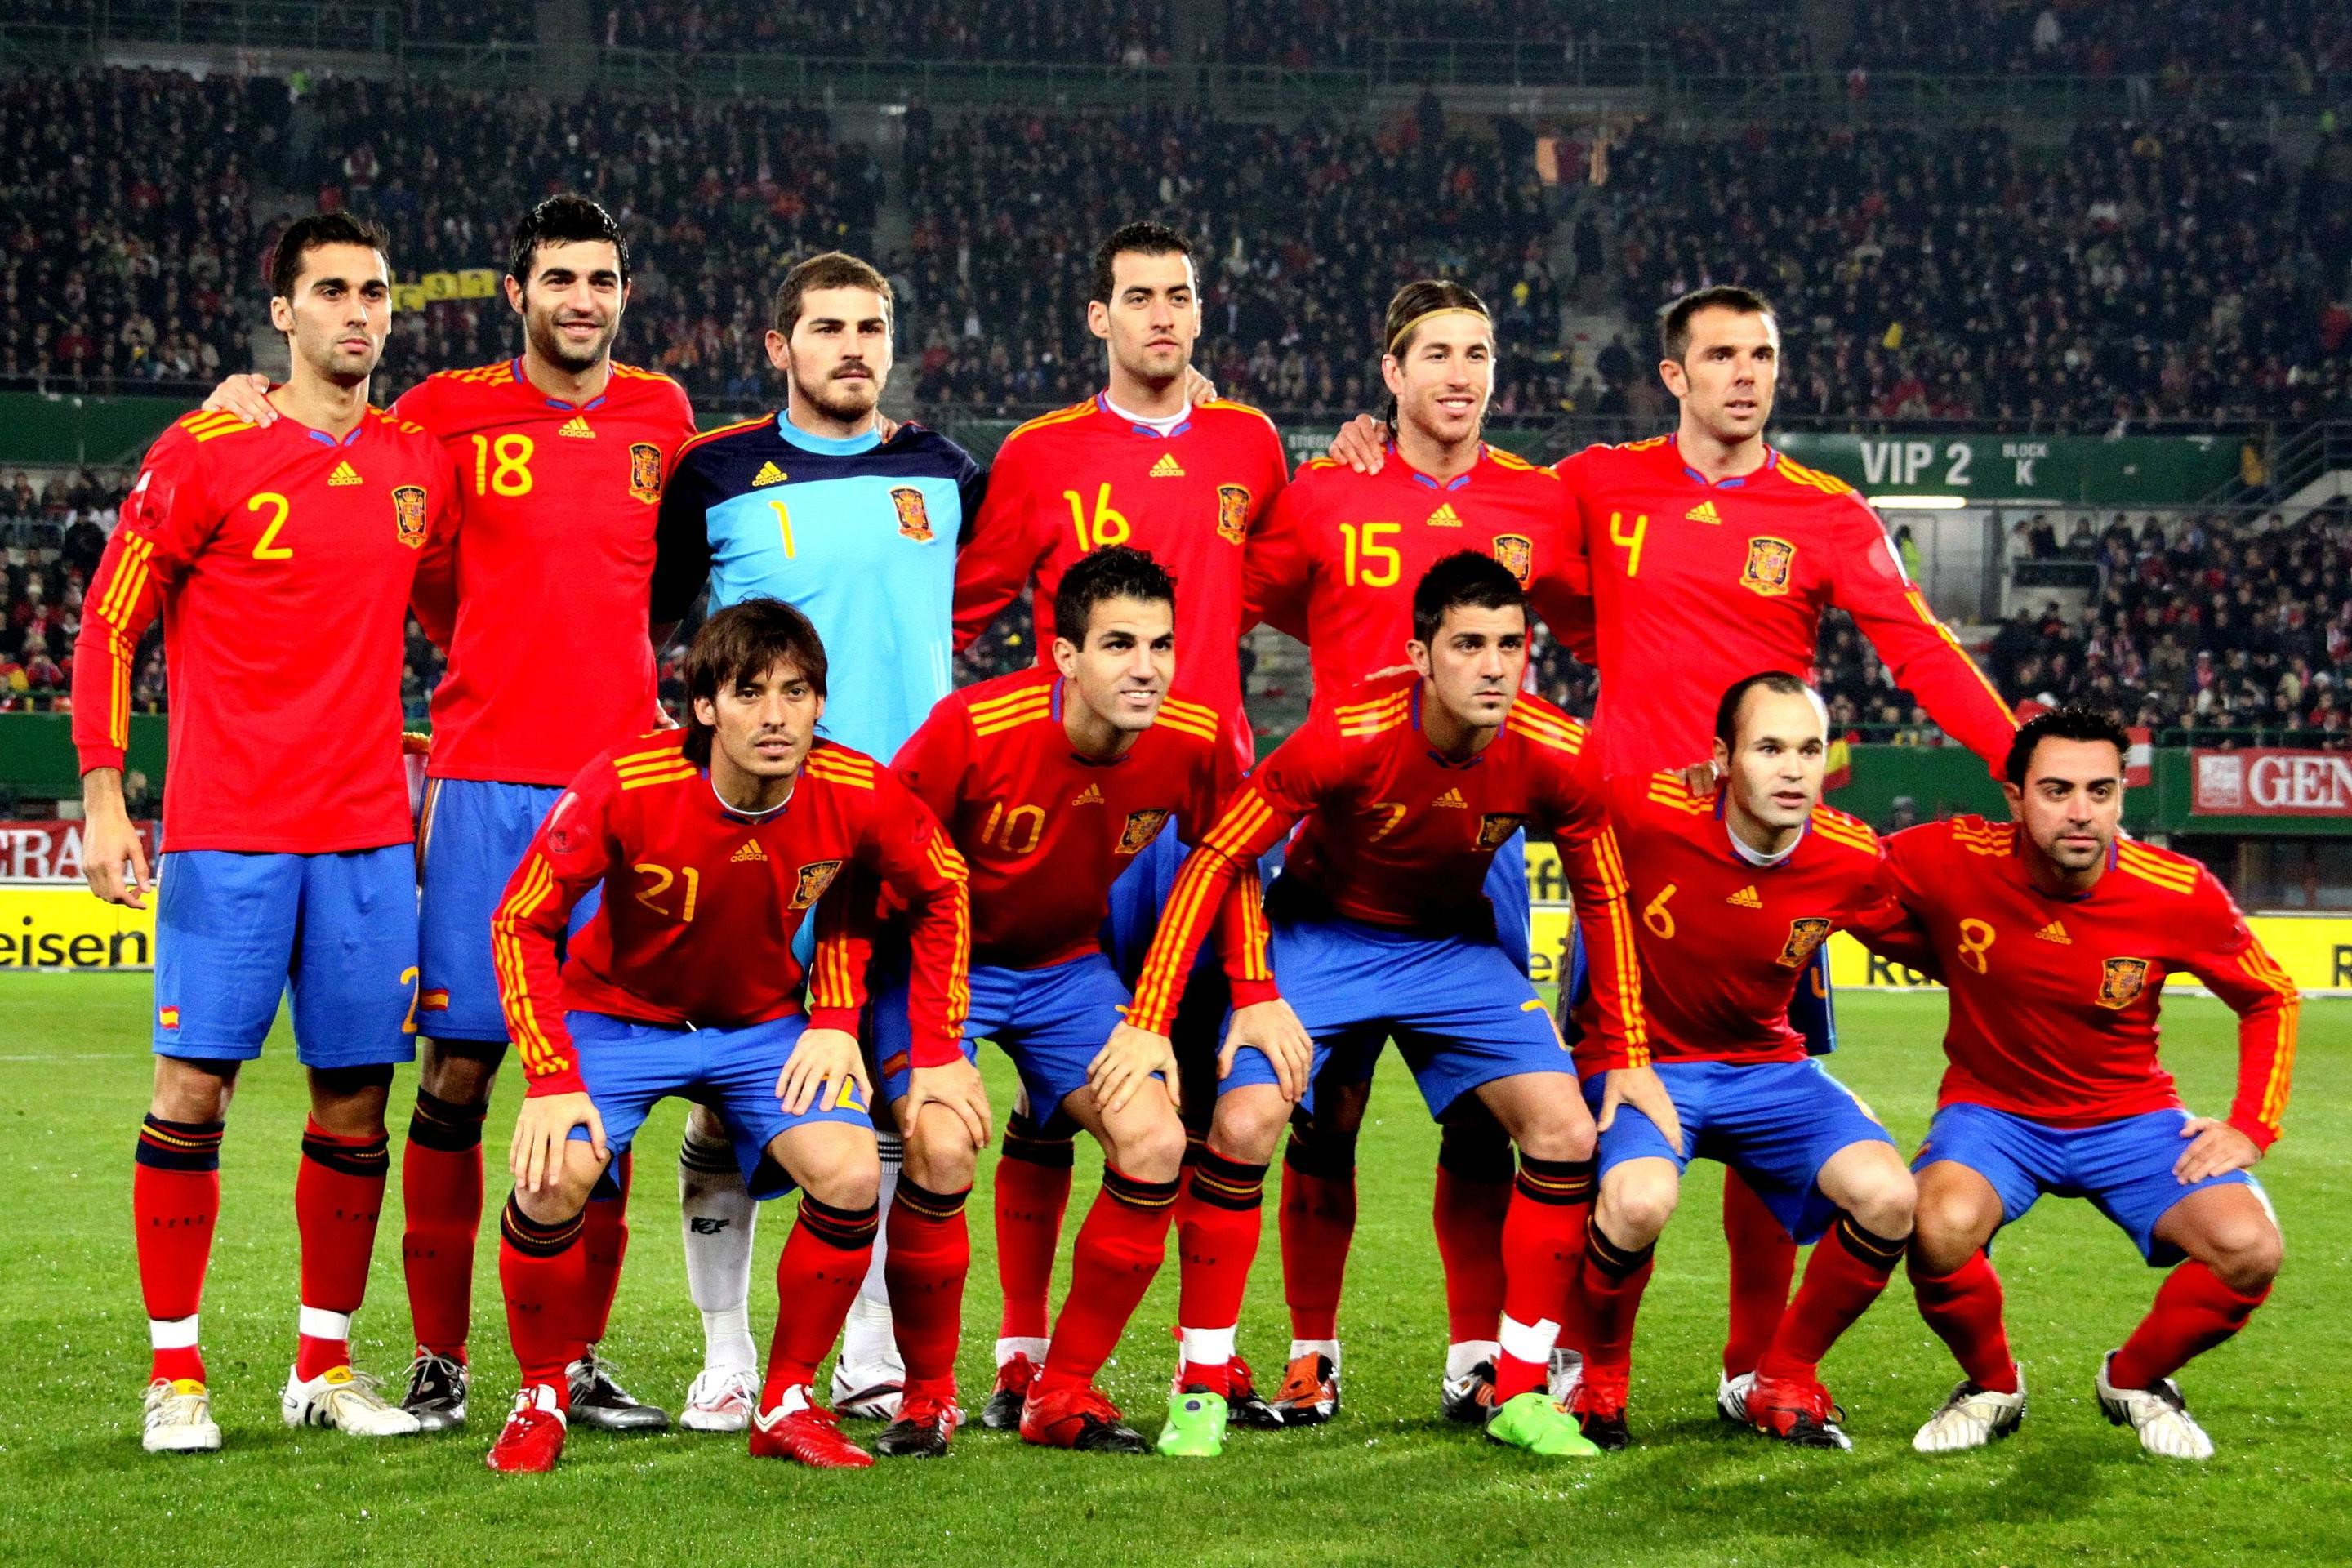 Spain Football Team Hd Images Find Best Latest Spain - Spain Football Team  2018 - 2880x1920 Wallpaper - teahub.io